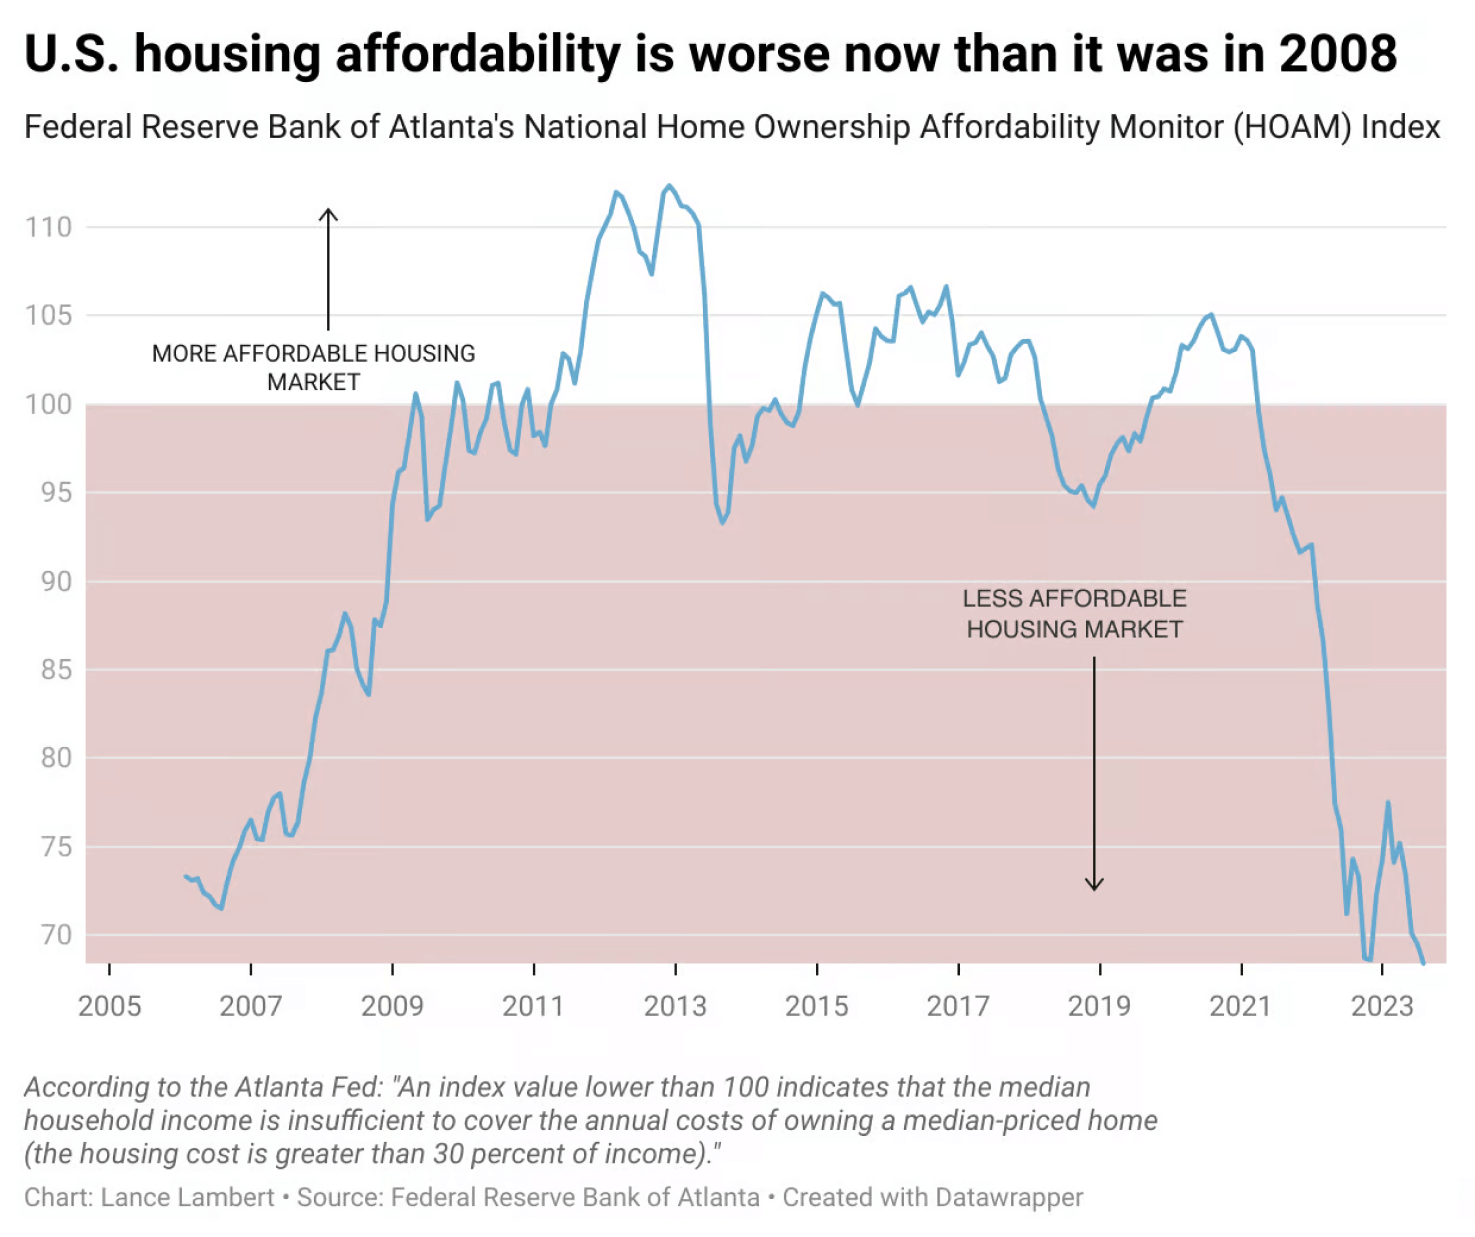 U.S. housing affordability is worse now than it was in 2008